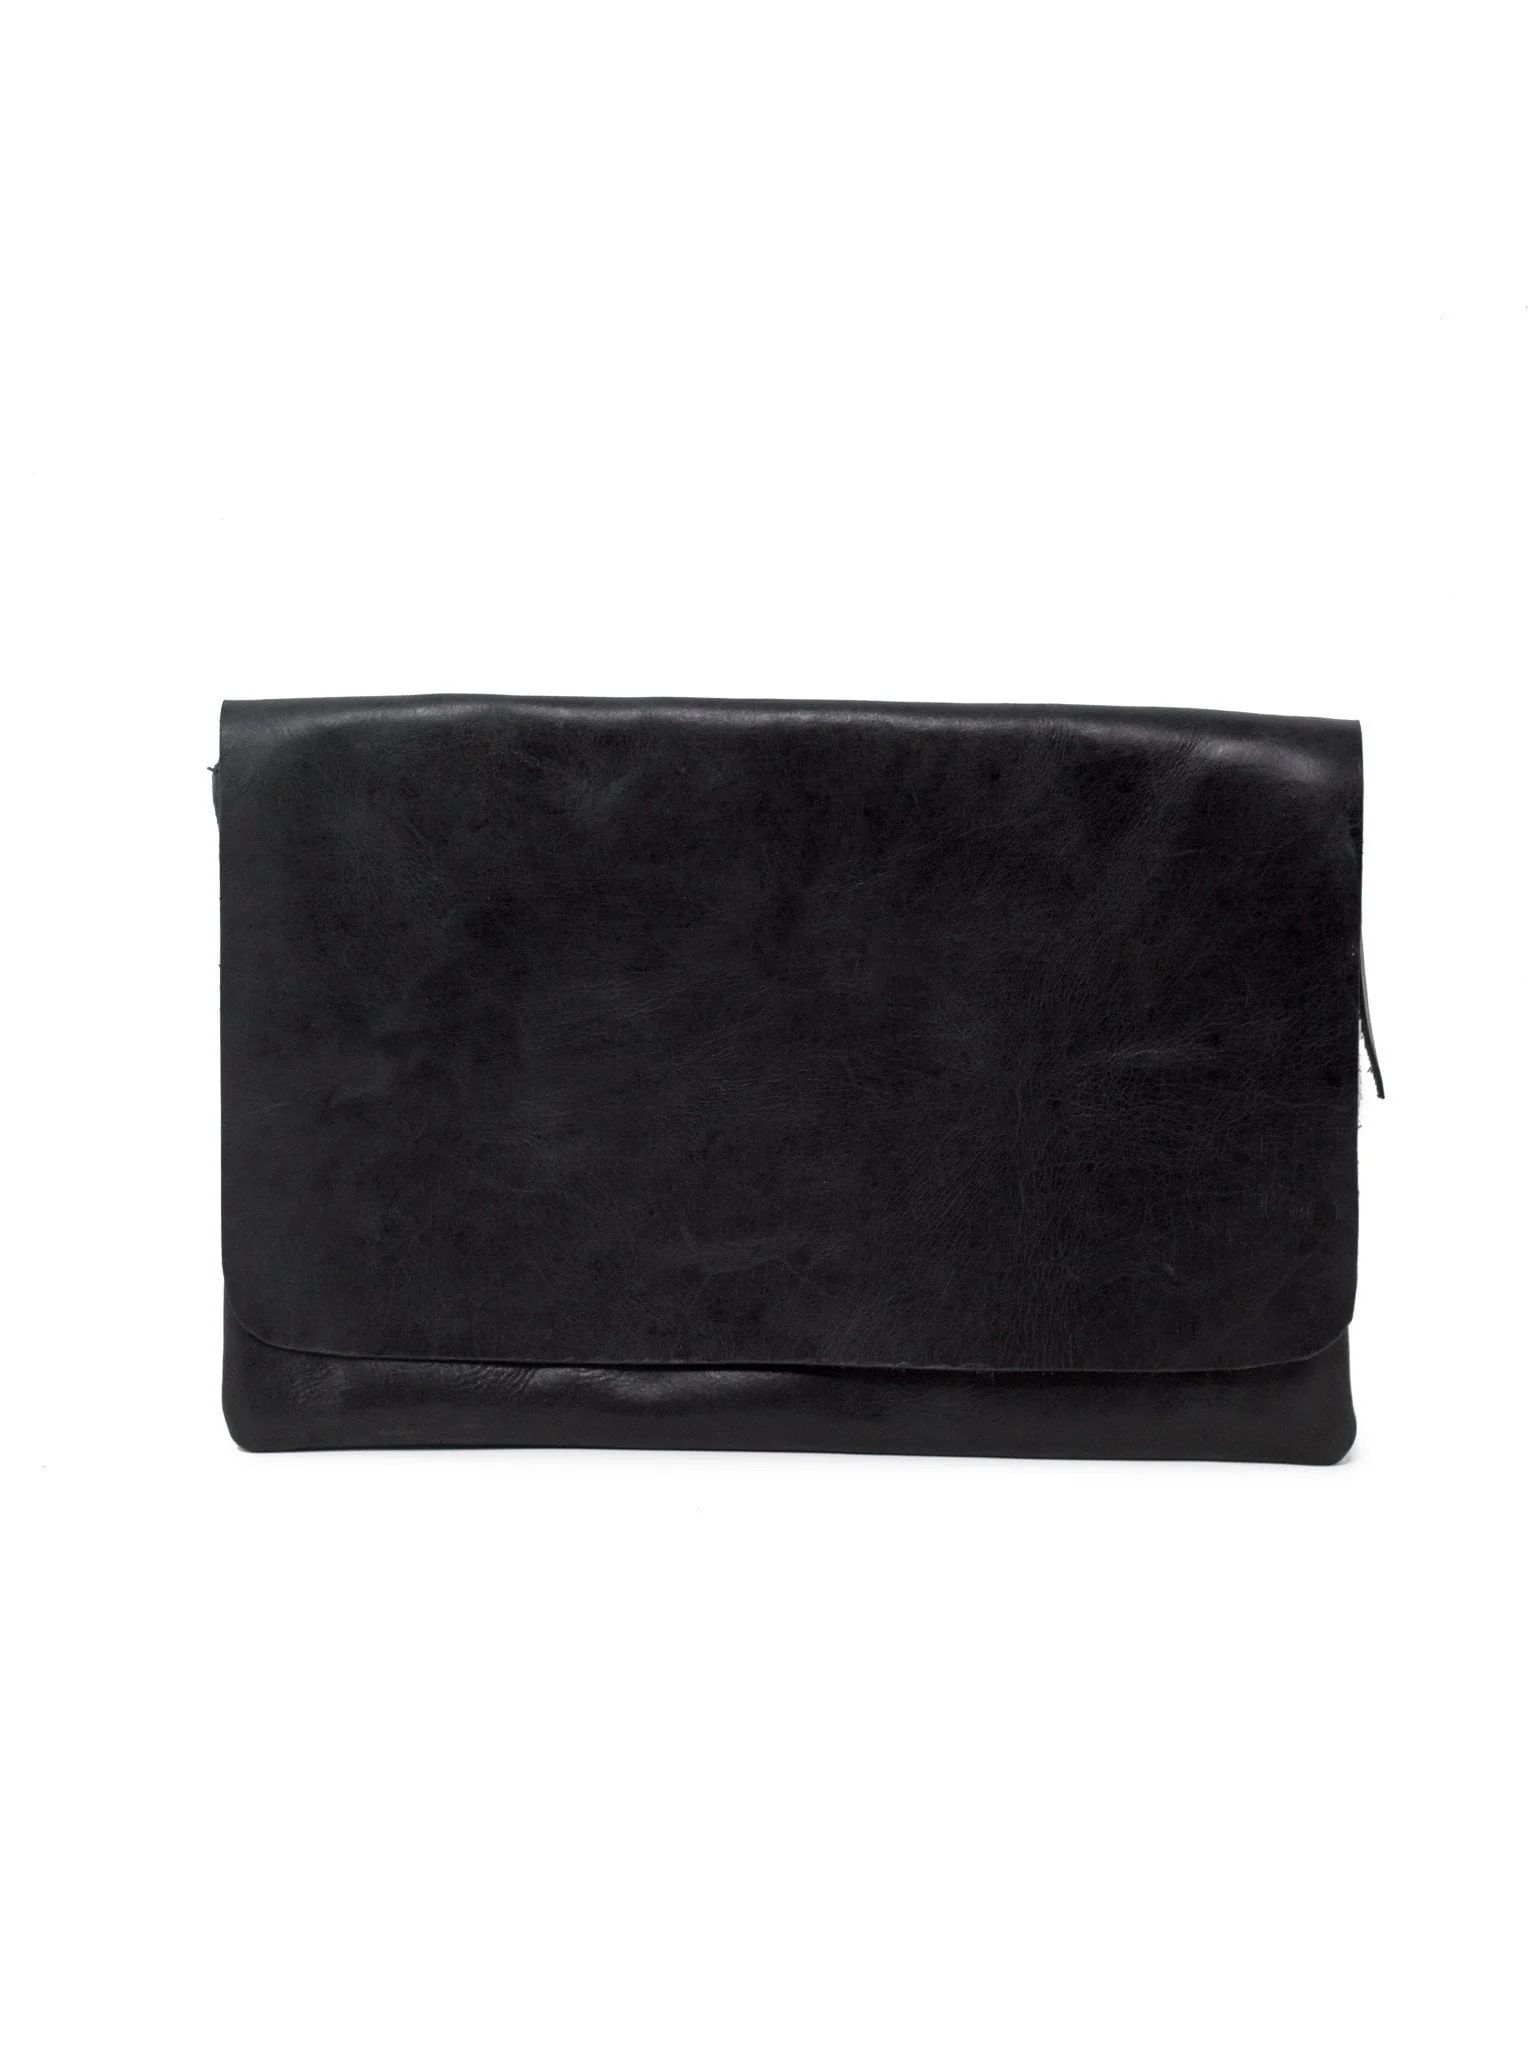 Mare Zip Clutch | ABLE